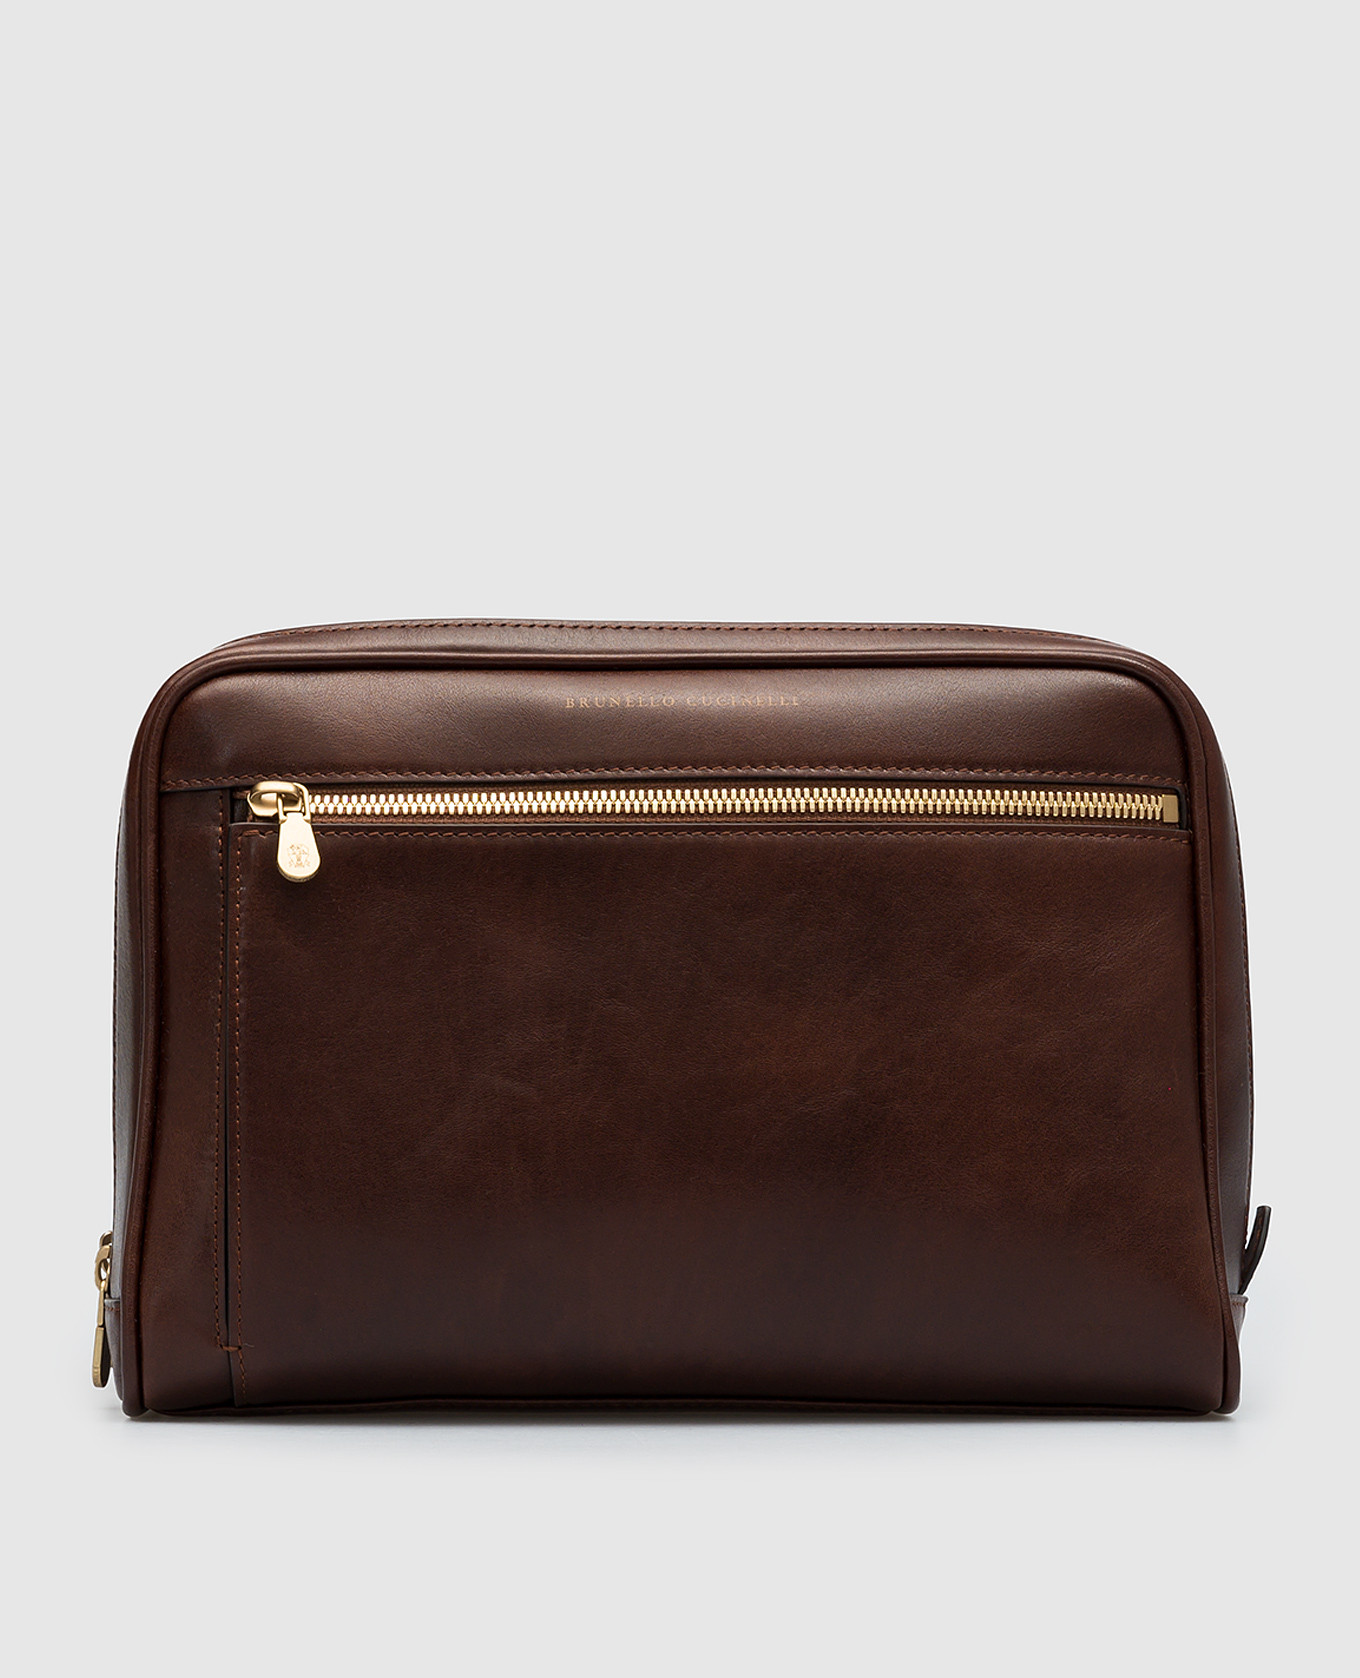 Brown leather toiletry bag with logo